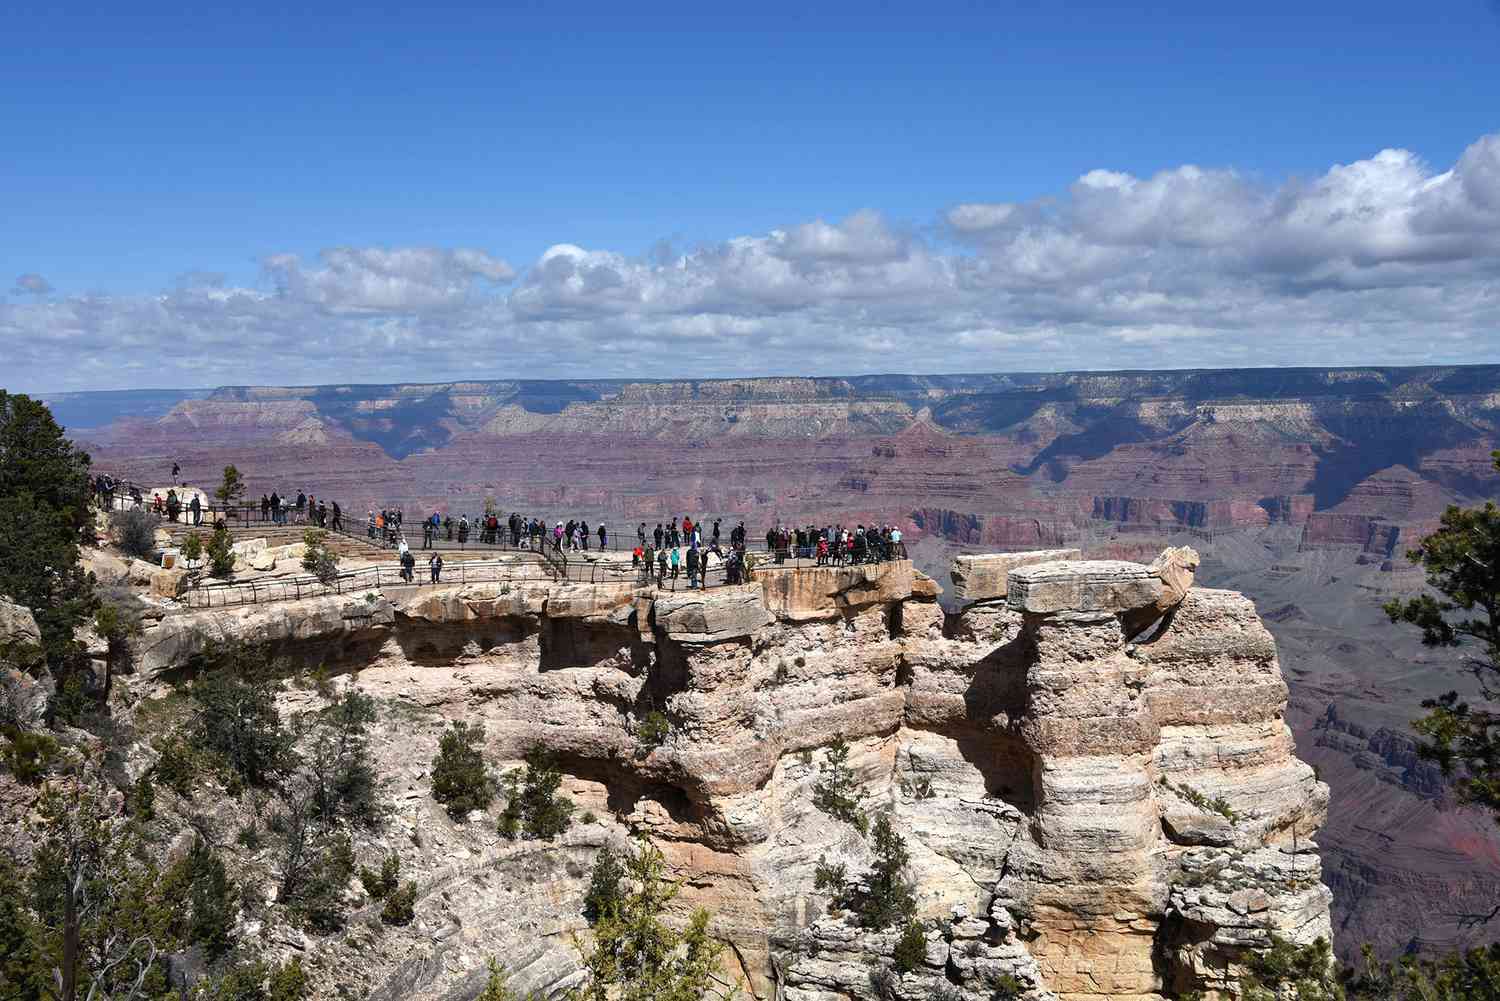 Arizona Woman, 59, Falls to Her Death While Hiking and Taking Photos at Grand Canyon